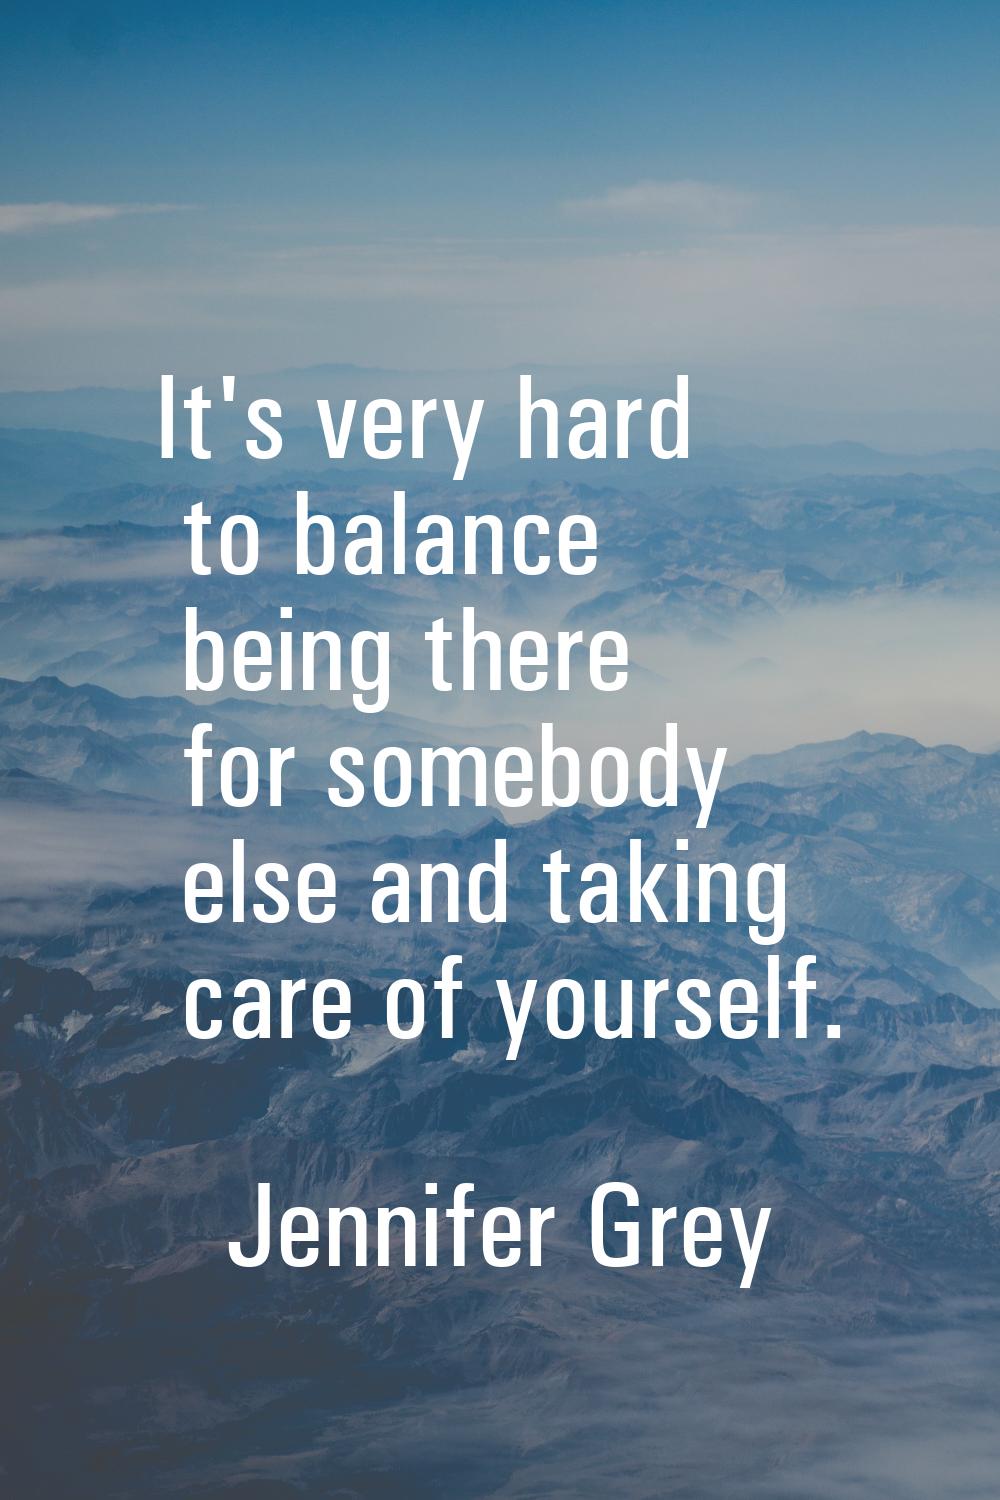 It's very hard to balance being there for somebody else and taking care of yourself.